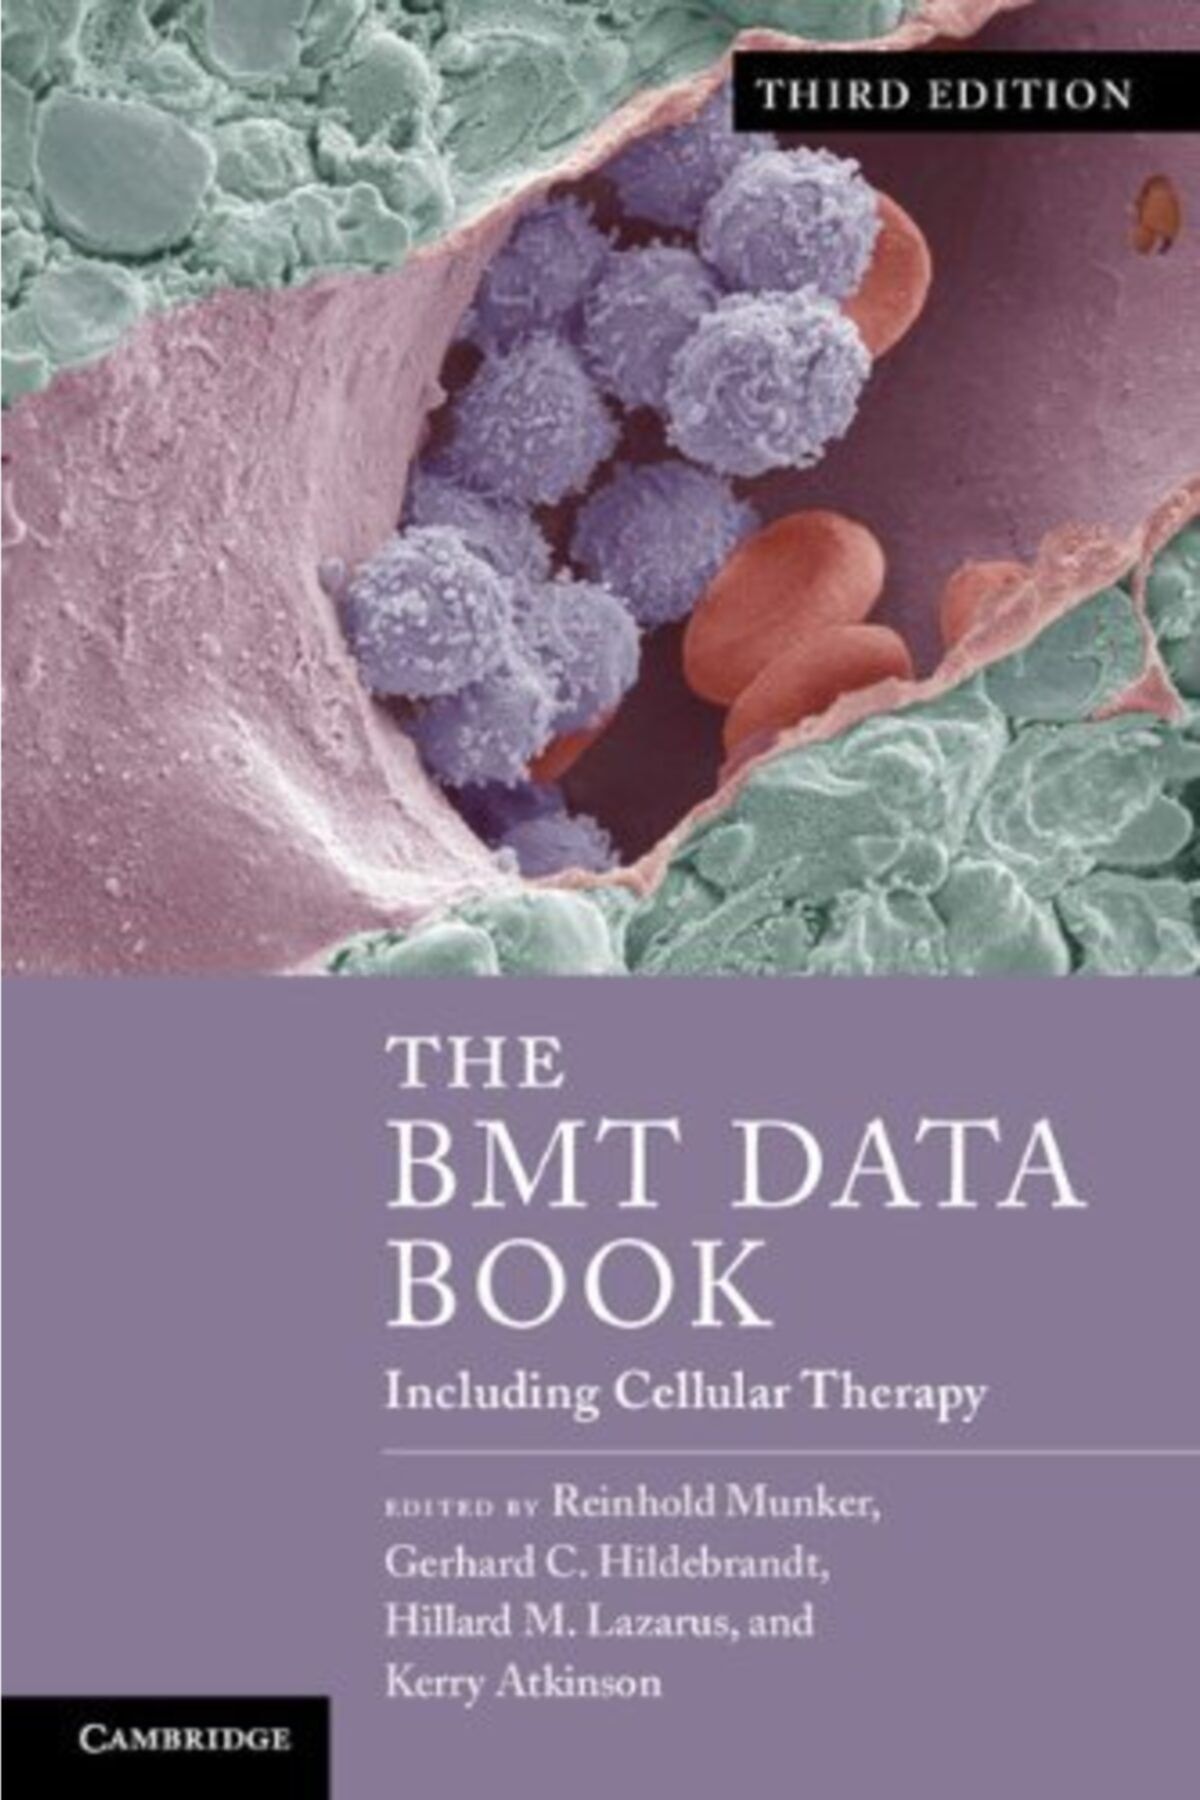 Cambridge University The Bmt Data Book: Including Cellular Therapy 3rd Edition, Kindle Edition